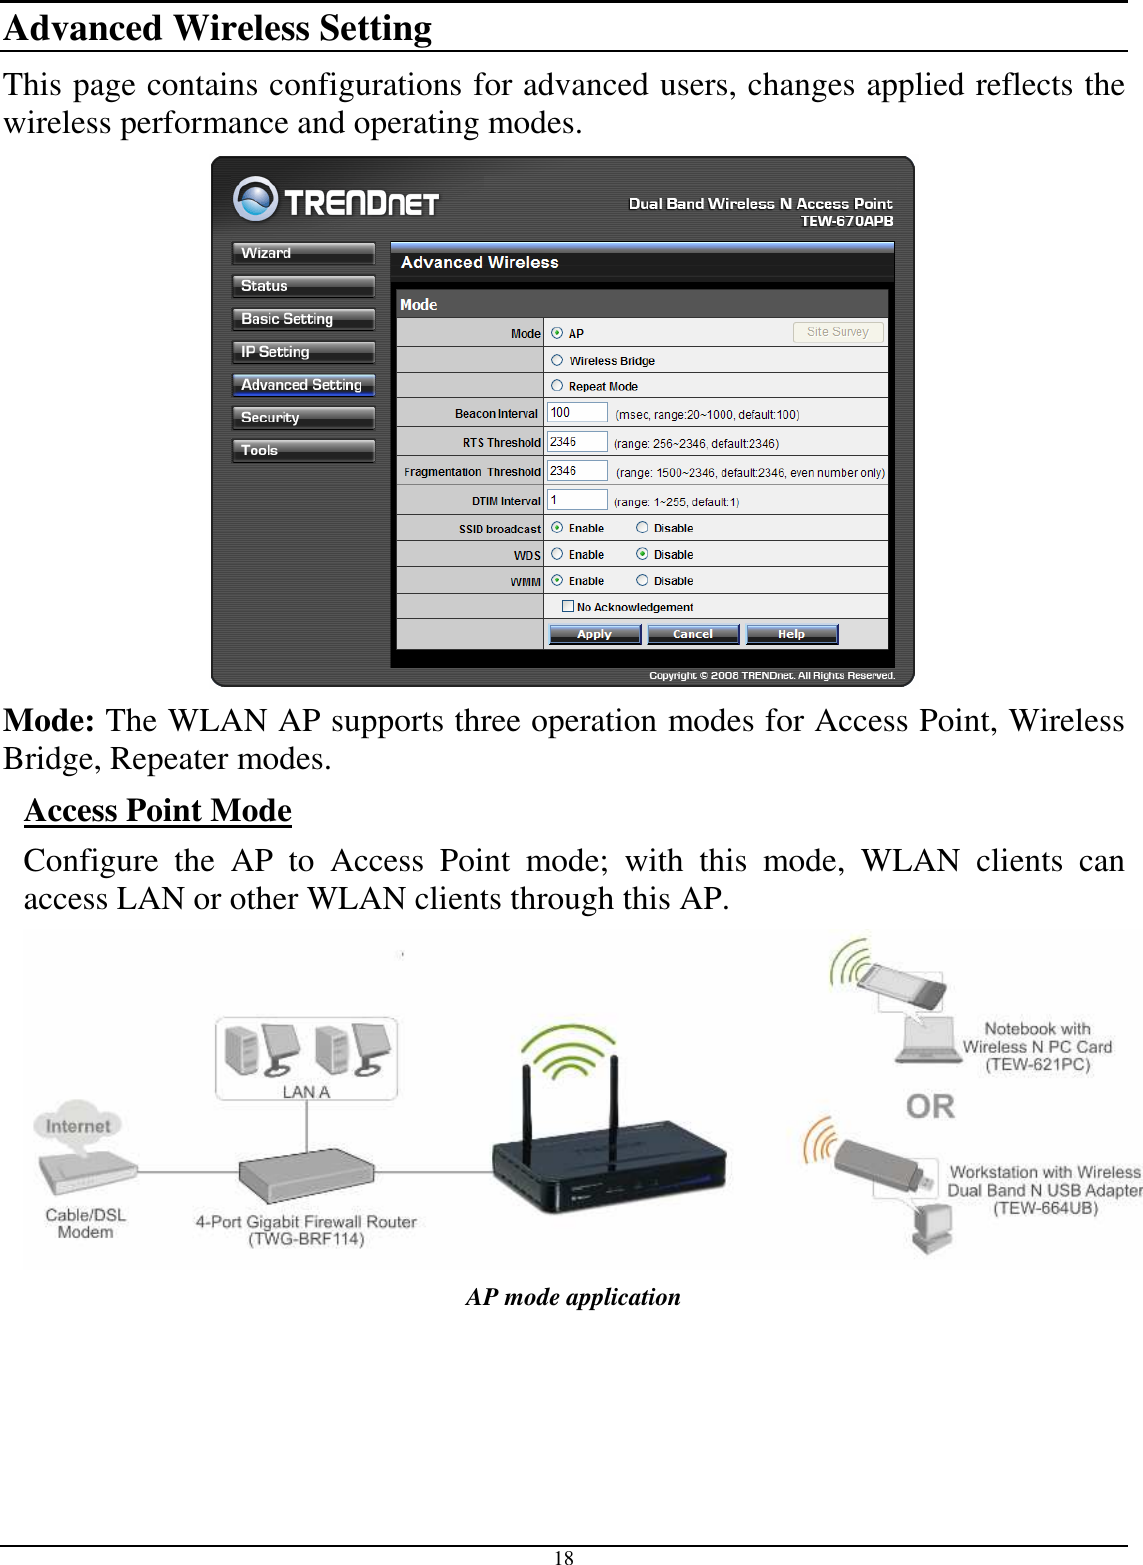  18 Advanced Wireless Setting This page contains configurations for advanced users, changes applied reflects the wireless performance and operating modes.  Mode: The WLAN AP supports three operation modes for Access Point, Wireless Bridge, Repeater modes. Access Point Mode Configure  the  AP  to  Access  Point  mode;  with  this  mode,  WLAN  clients  can access LAN or other WLAN clients through this AP.  AP mode application 